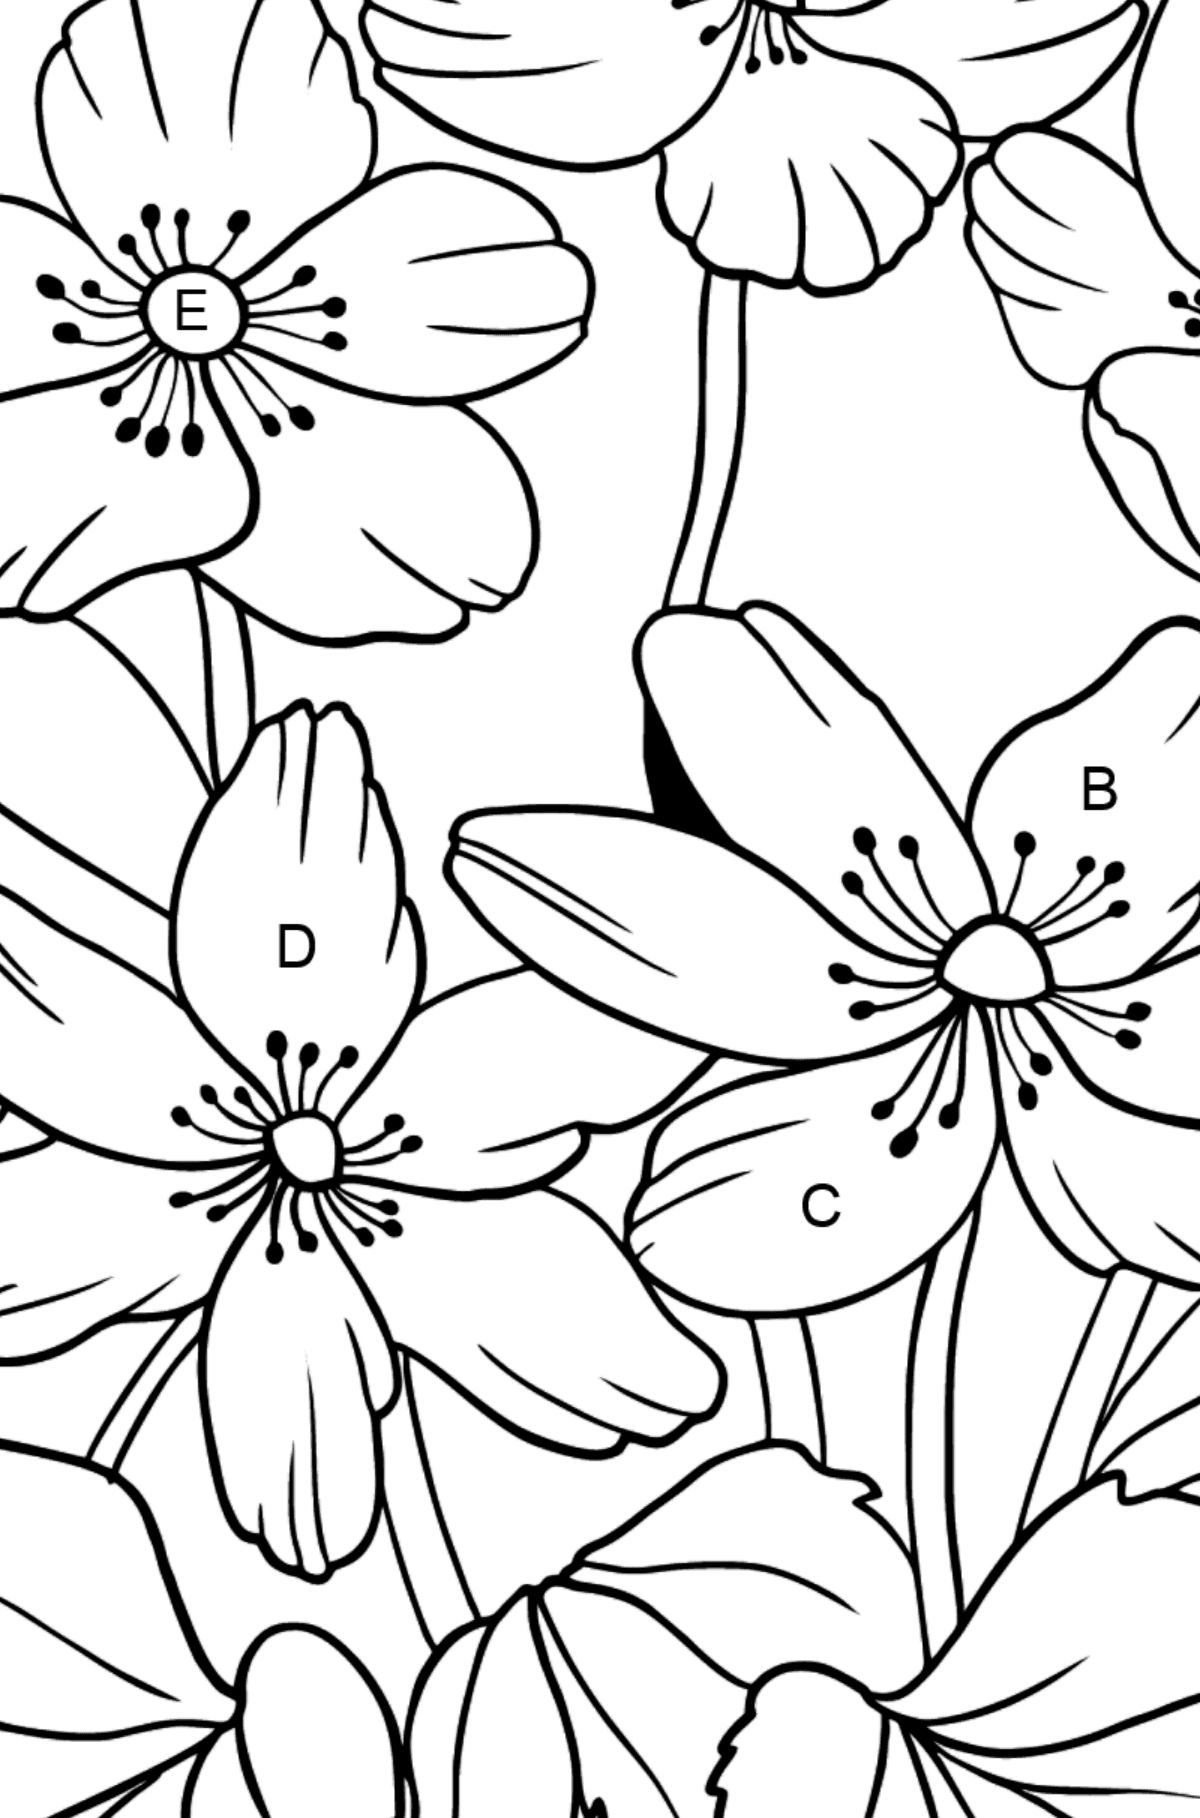 Flower Coloring Page - A Pastel Yellow Windflower - Coloring by Letters for Kids